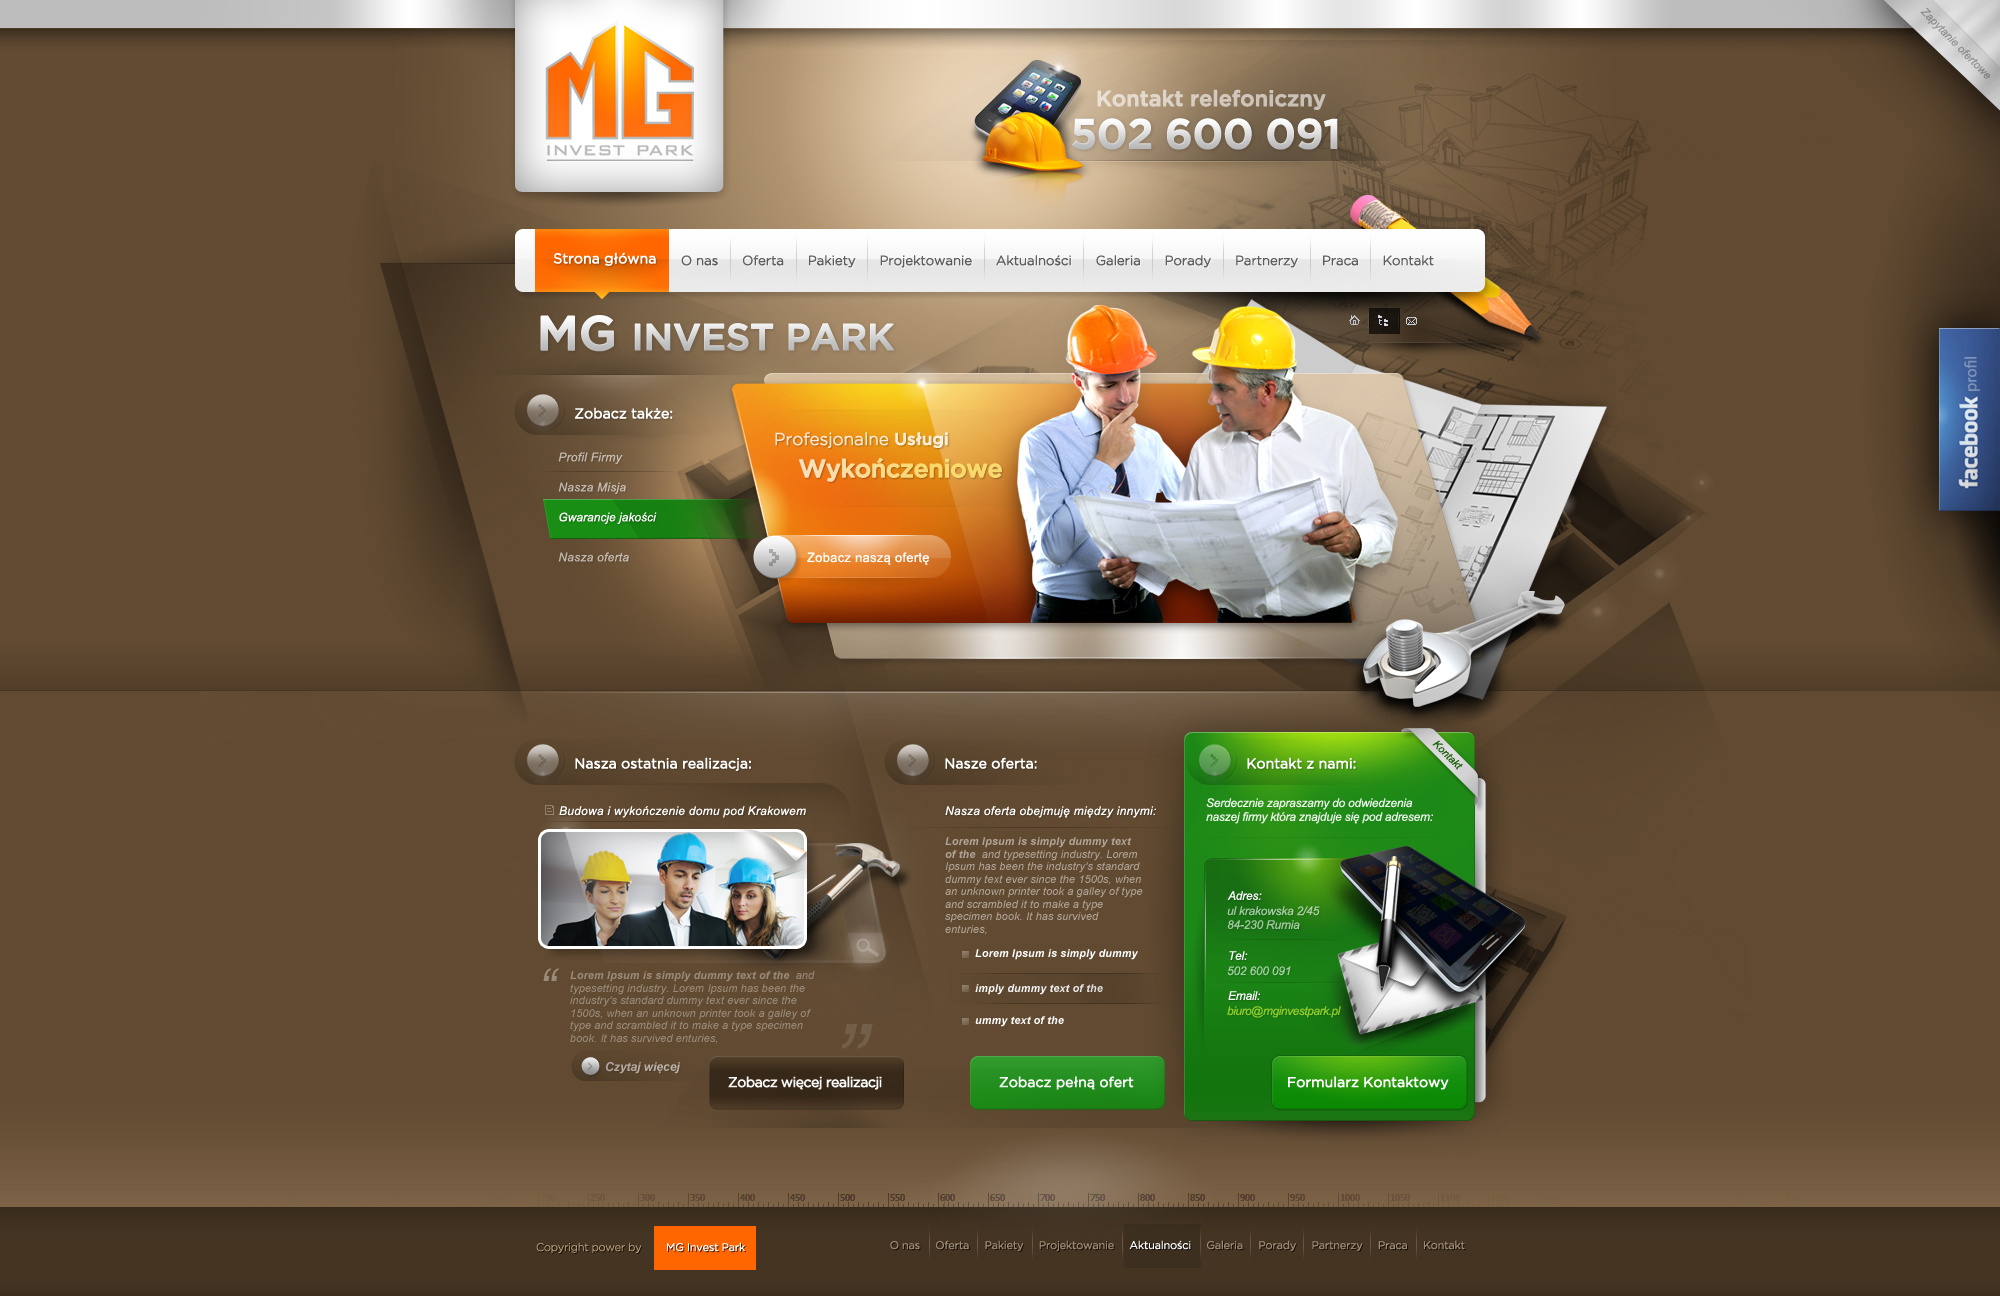 MG invest park  - home page